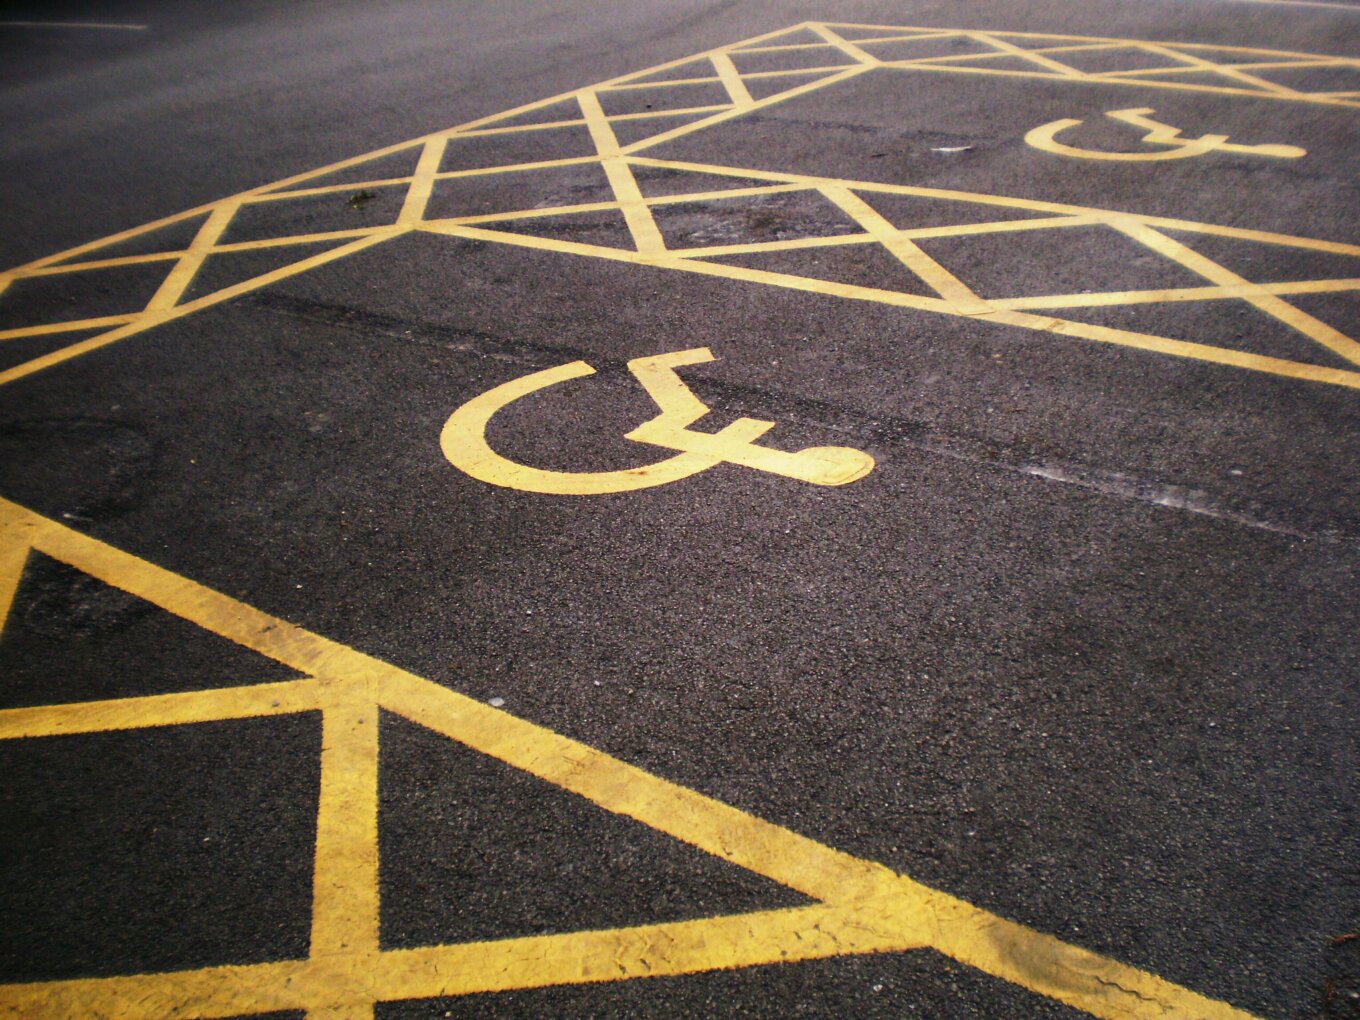 Accessible parking spaces marked with wheelchair symbols